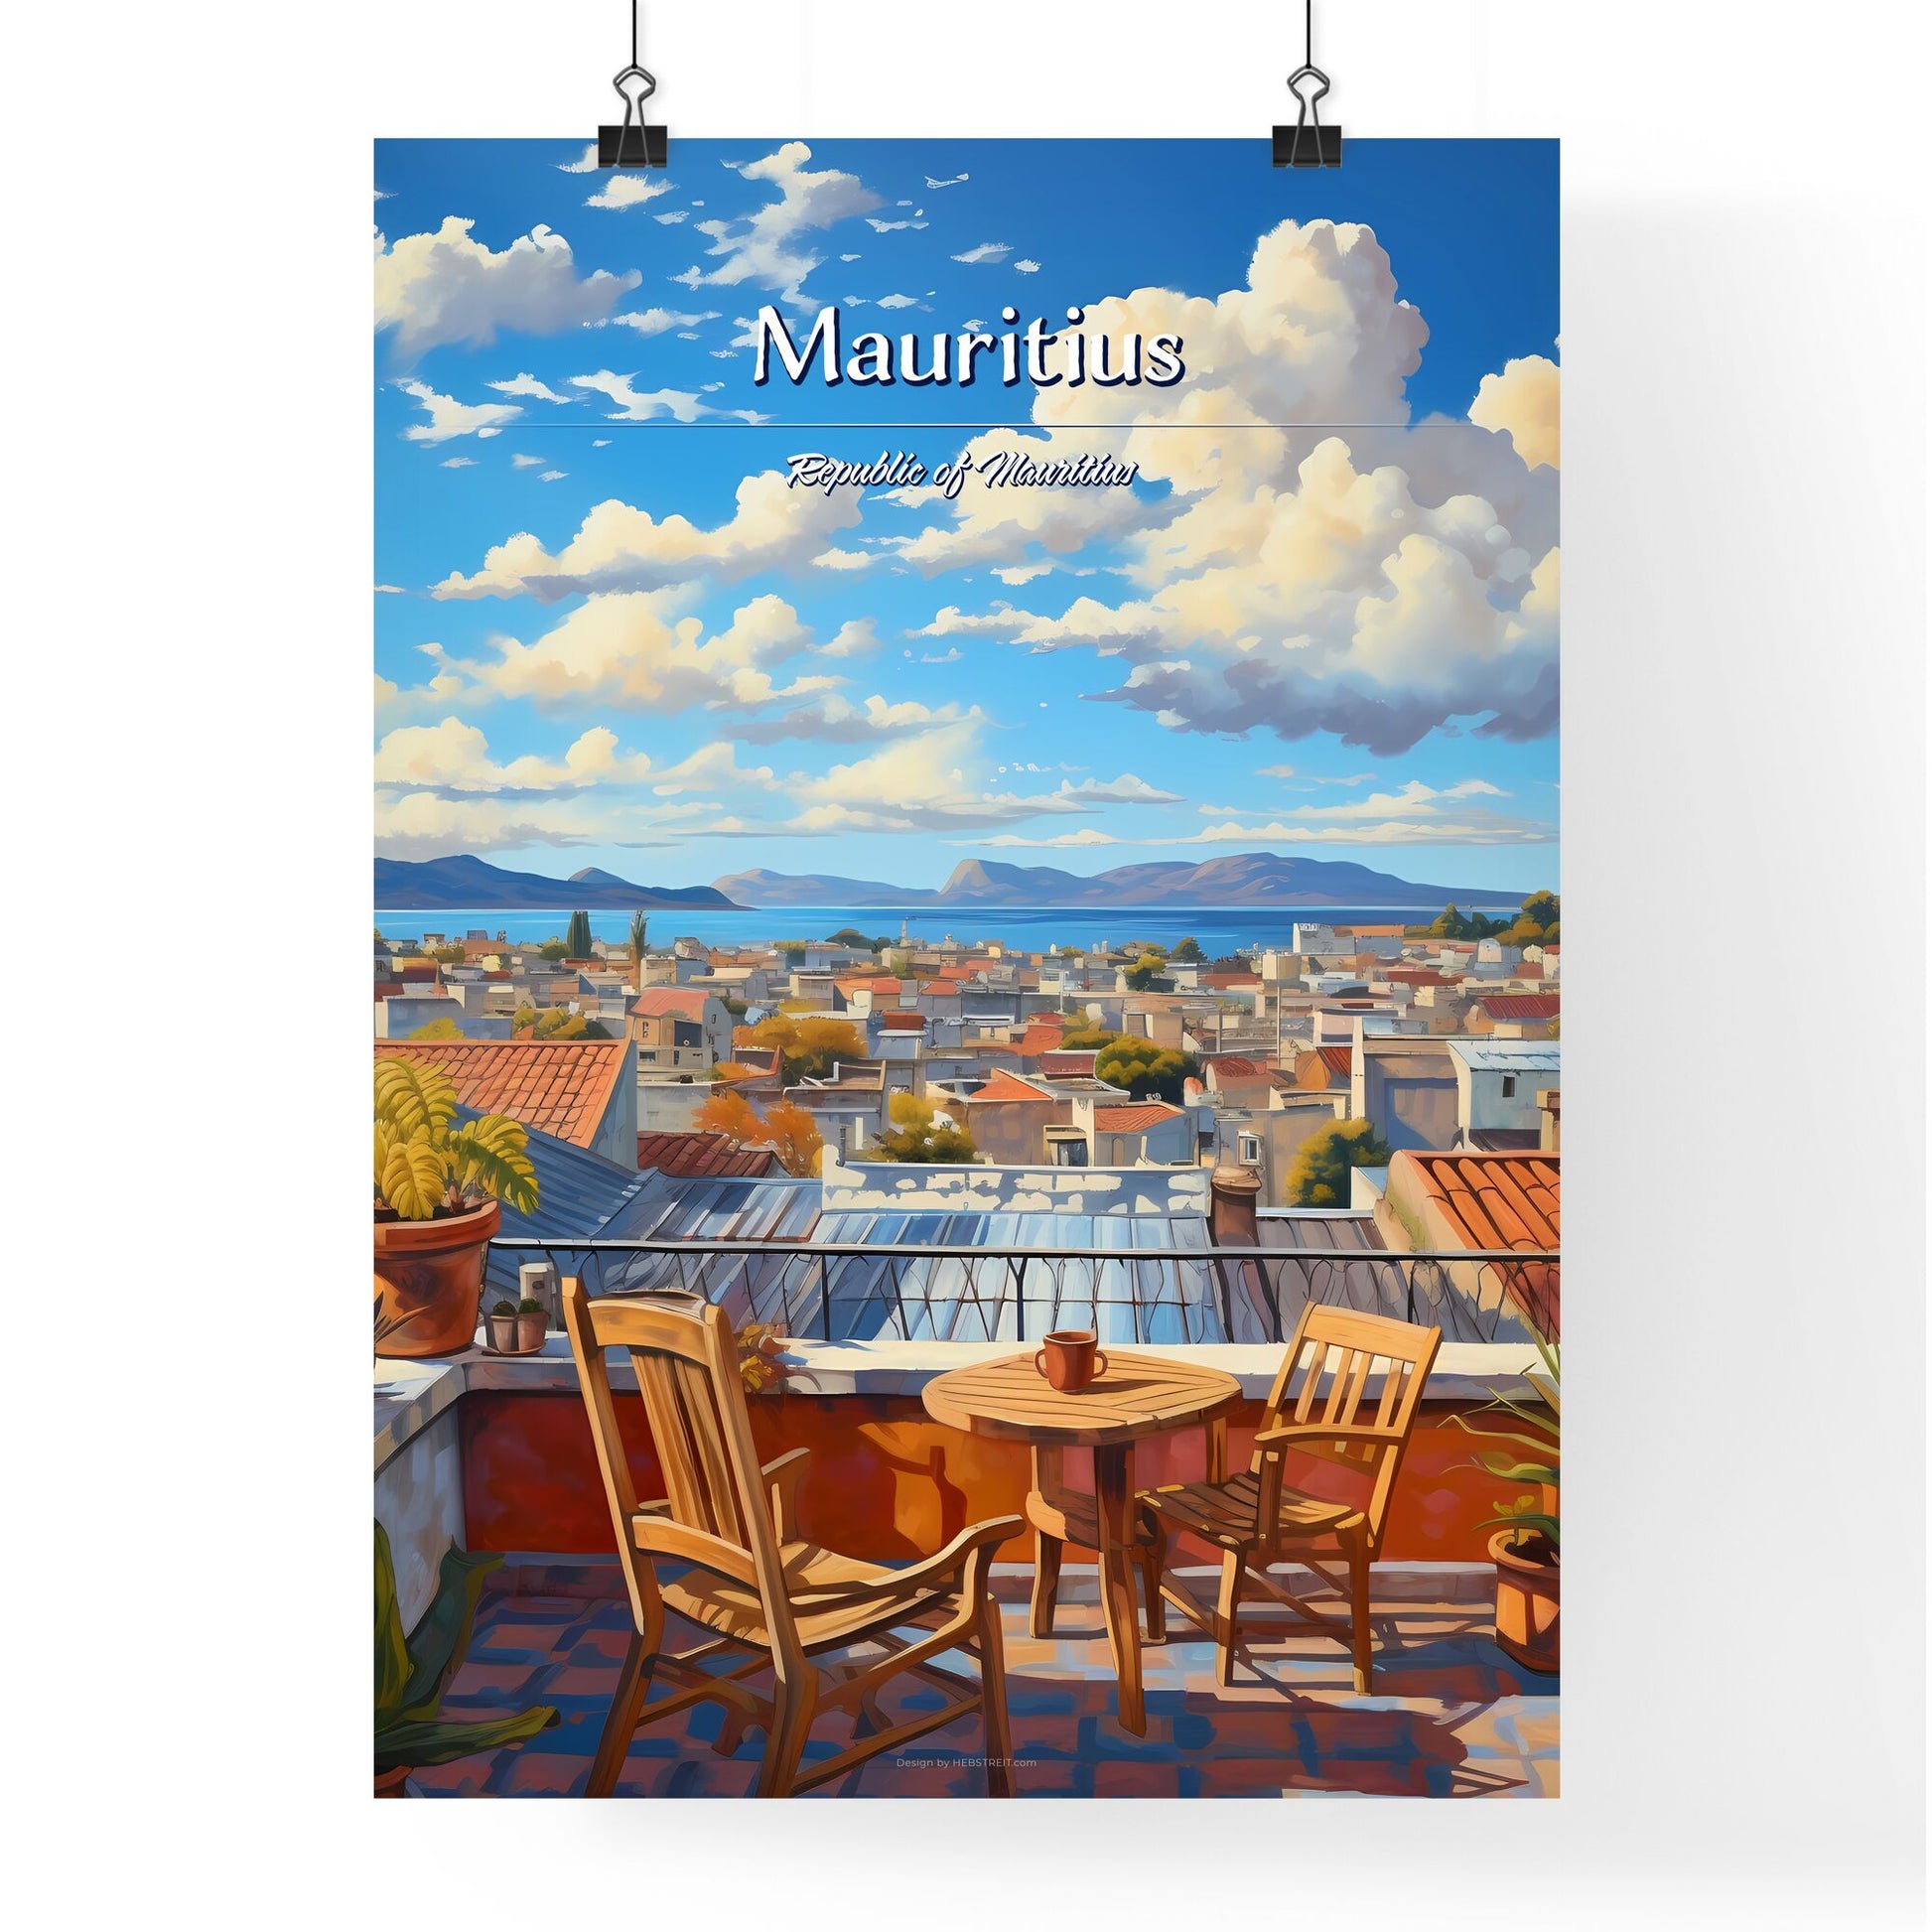 On the roofs of Mauritius, Republic of Mauritius - Art print of a table and chairs on a rooftop overlooking a city Default Title